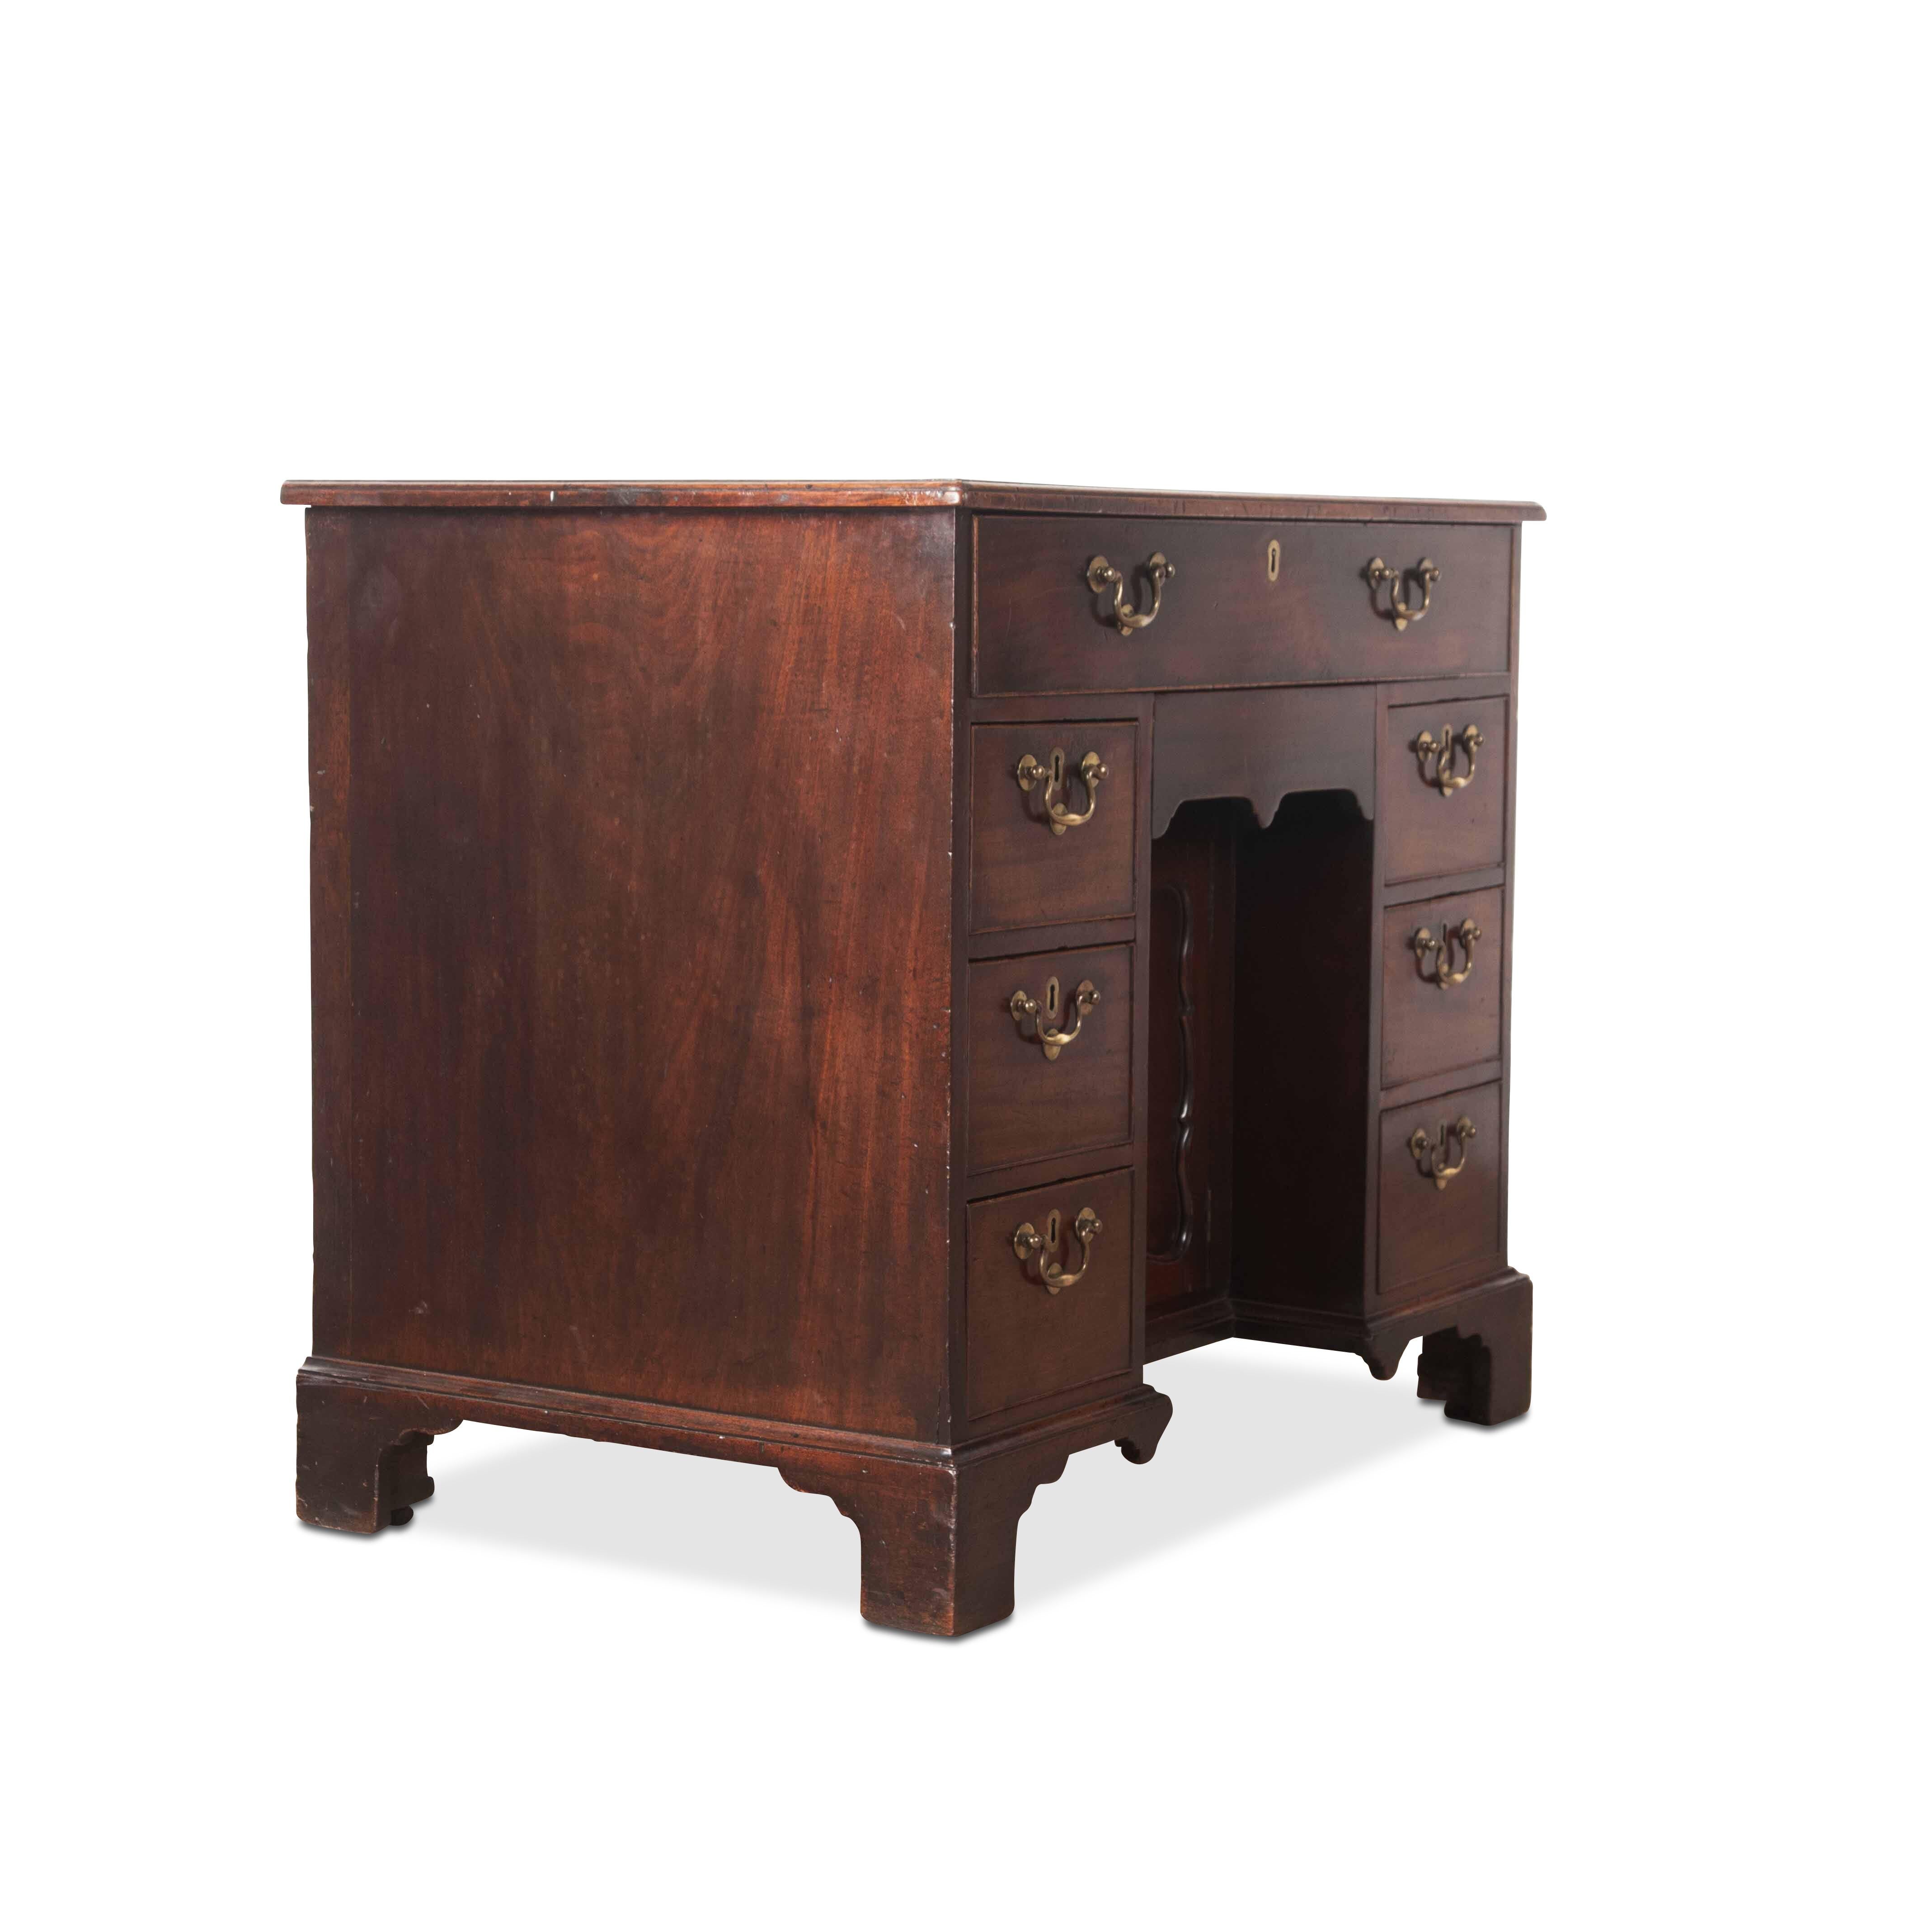 C18th Mahogany `Grendy` Kneehole Desk In Good Condition For Sale In Shipston-On-Stour, GB